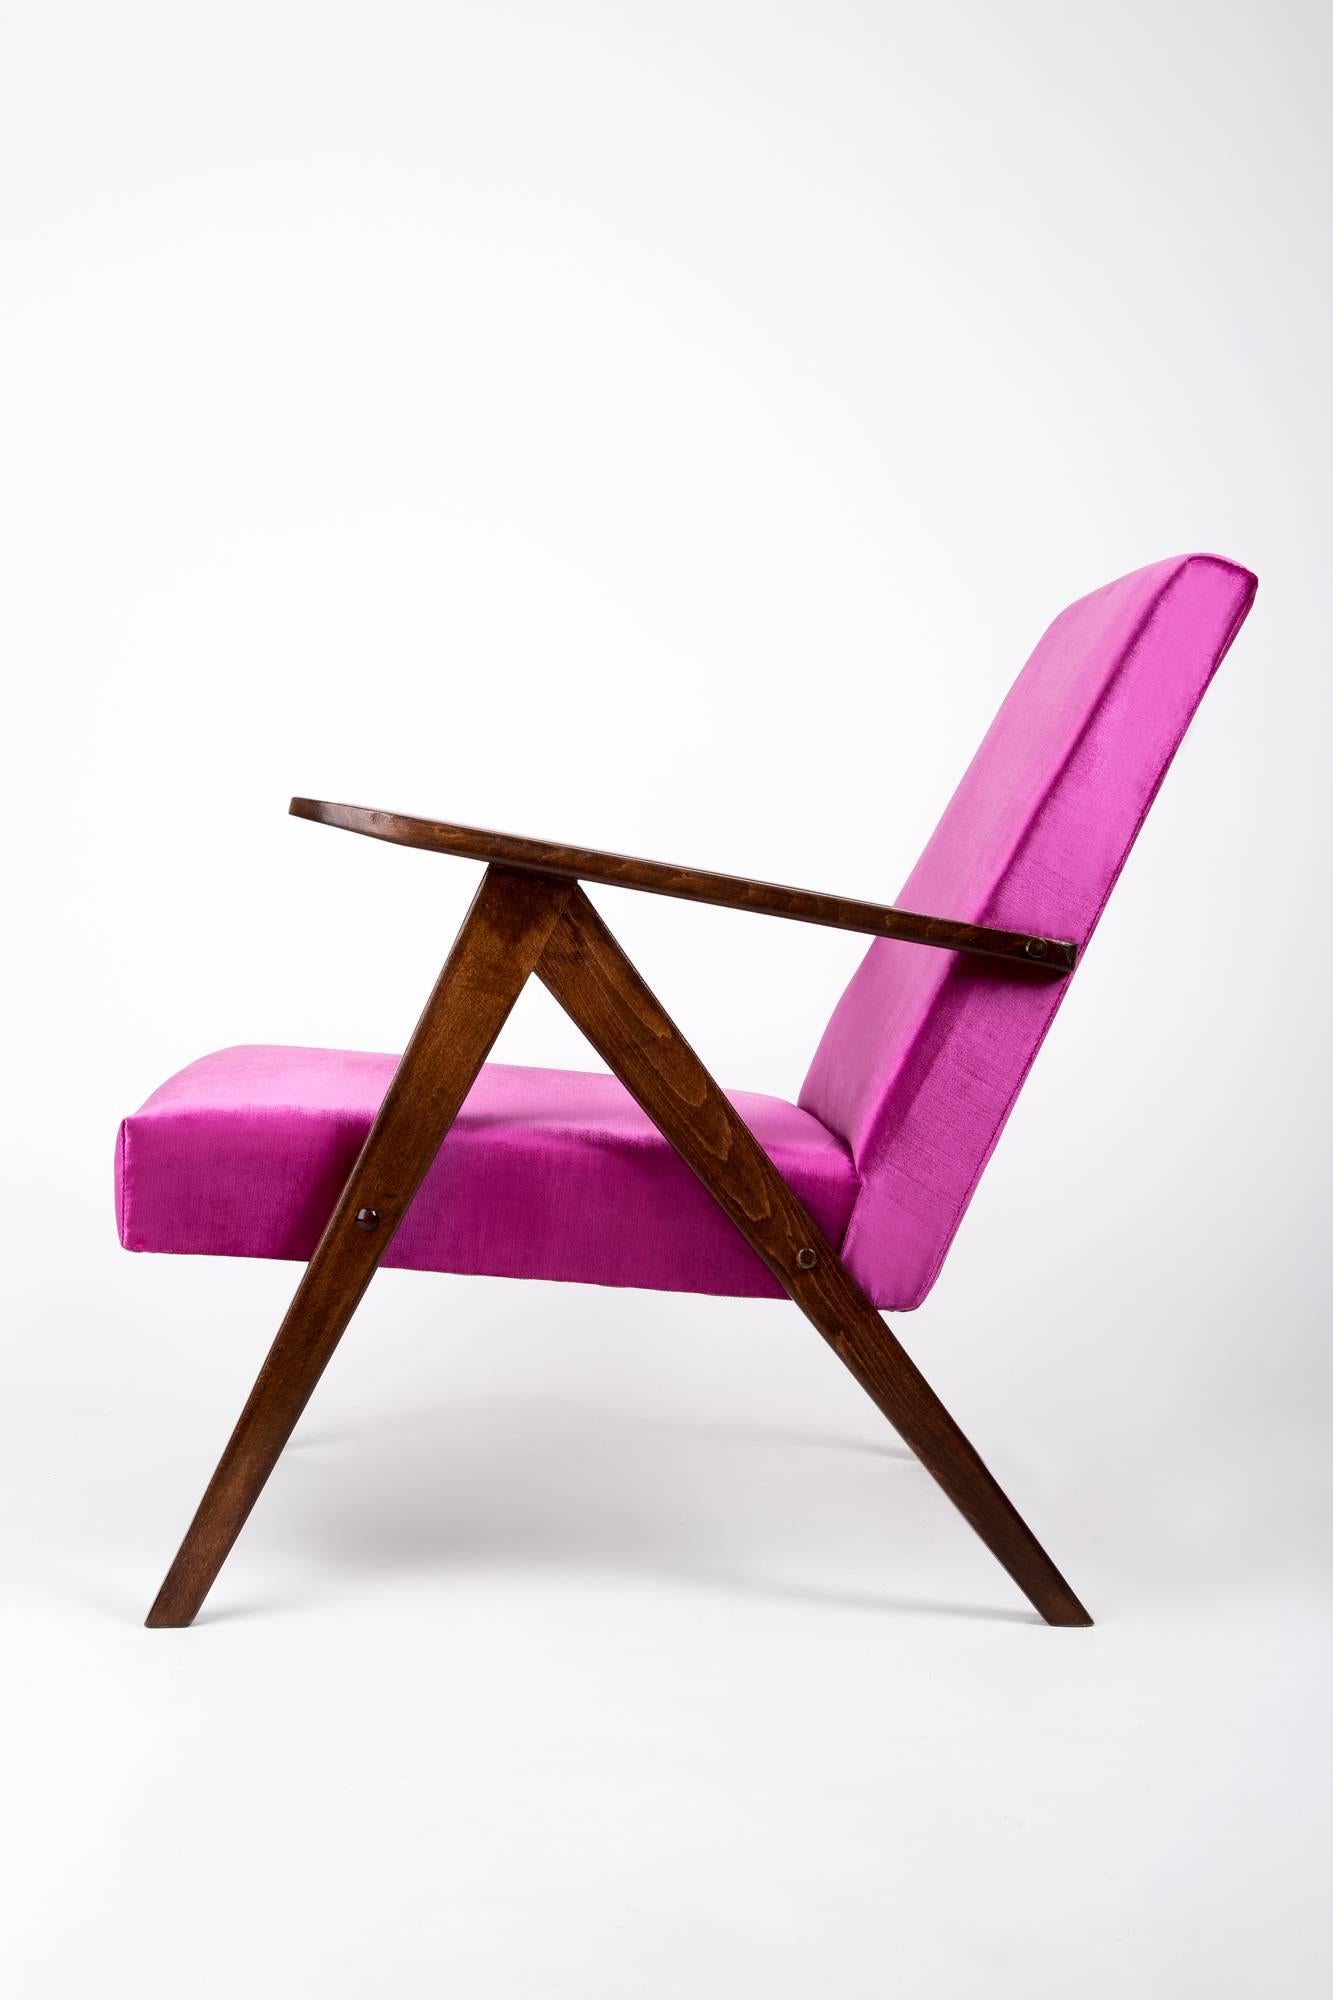 Hand-Crafted Set of Two Mid-Century Modern Magenta Pink Armchairs, 1960s, Poland For Sale